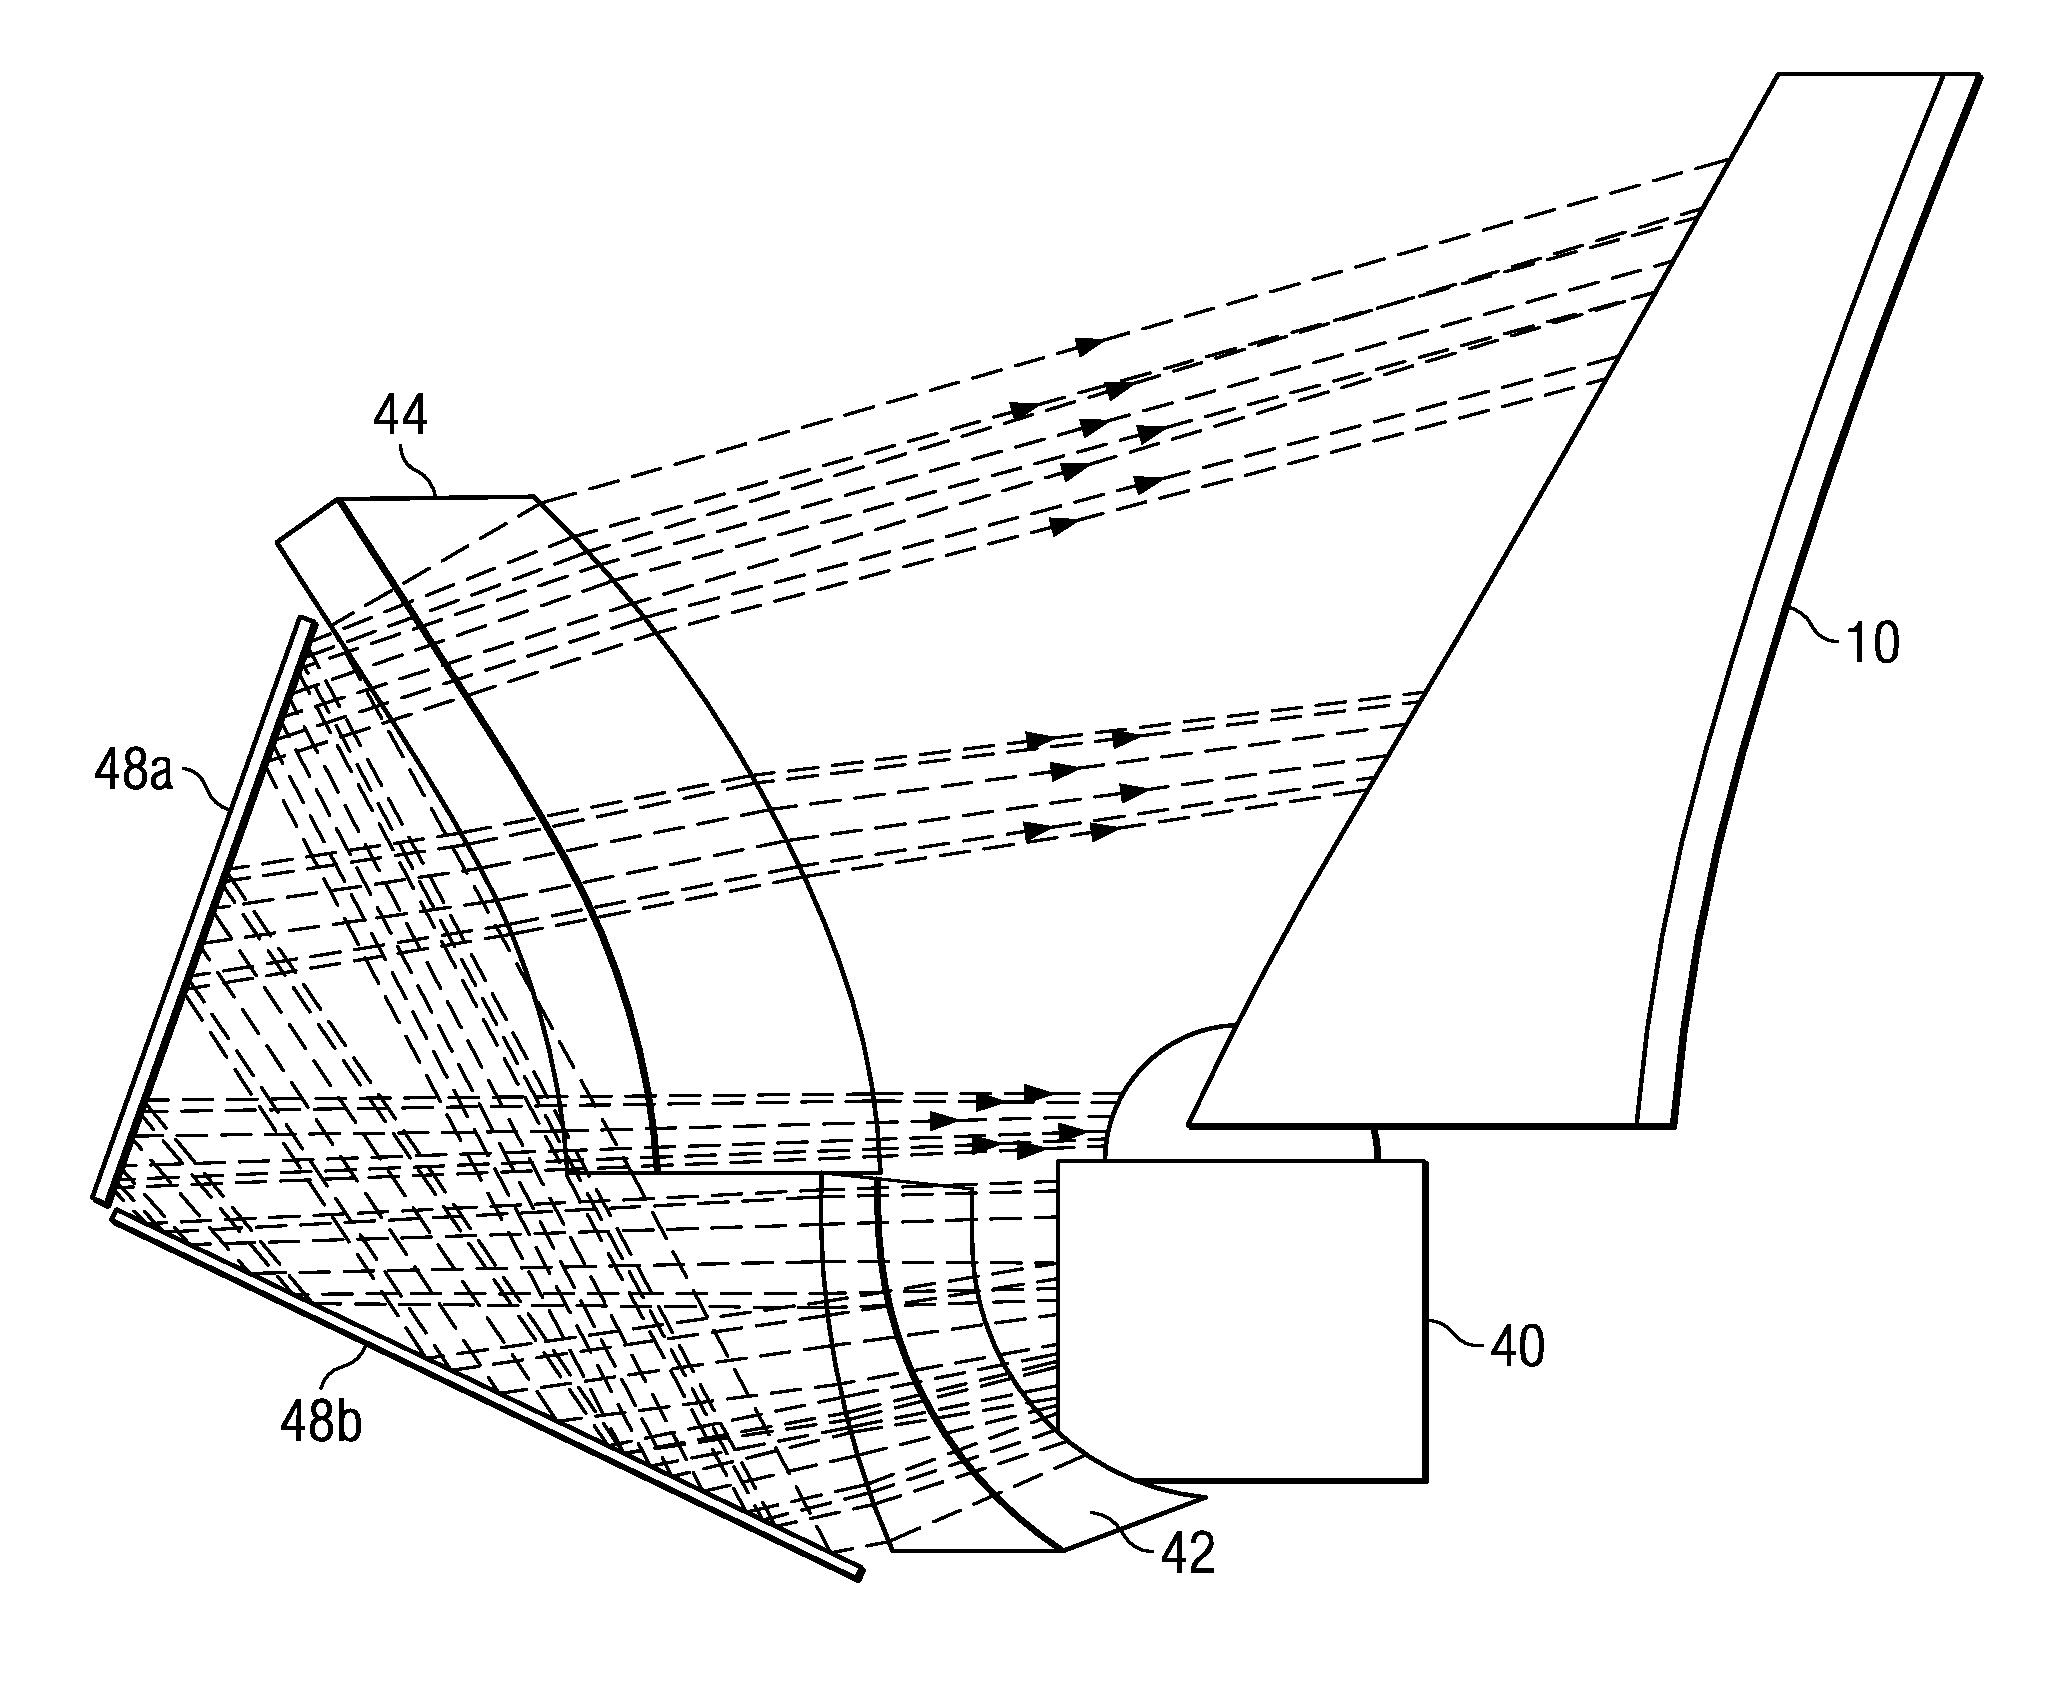 Optical System for a Thin, Low-Chin, Projection Television